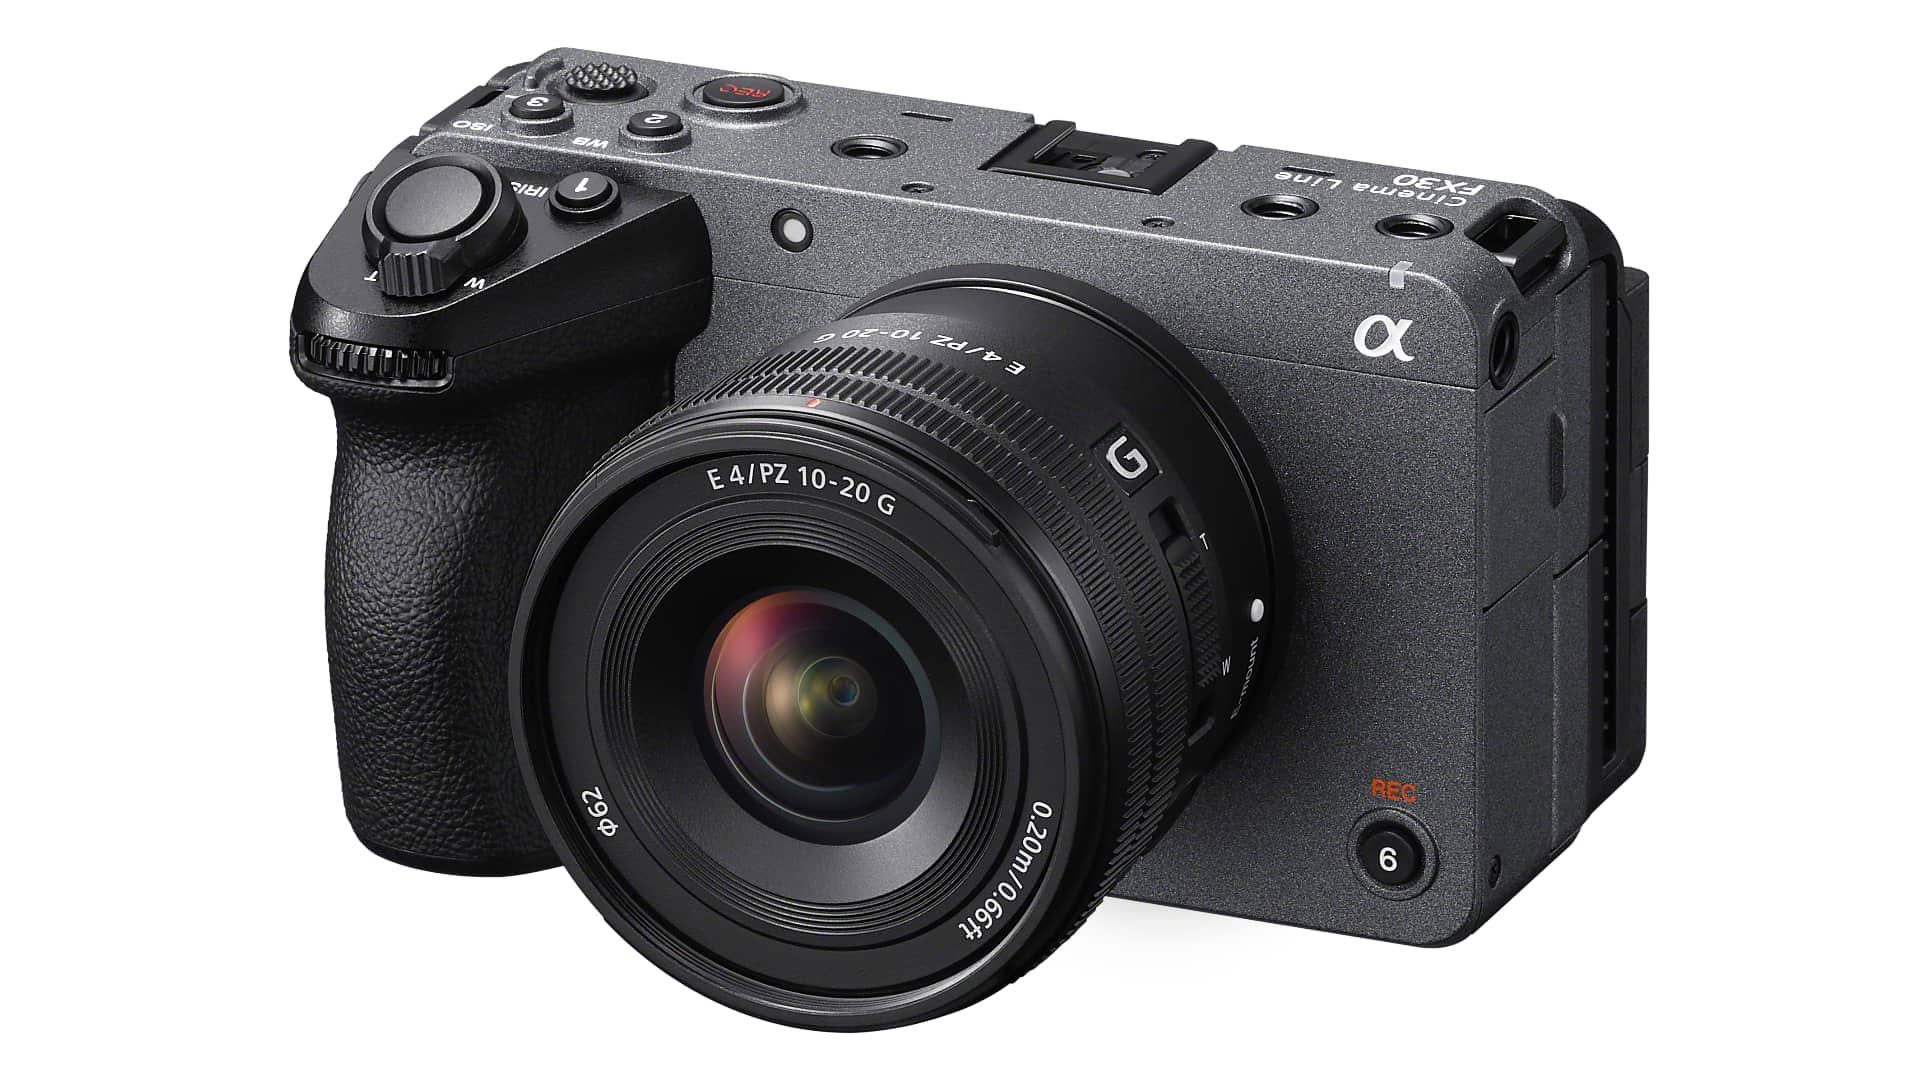 The Sony FX3: new firmware coming later this year